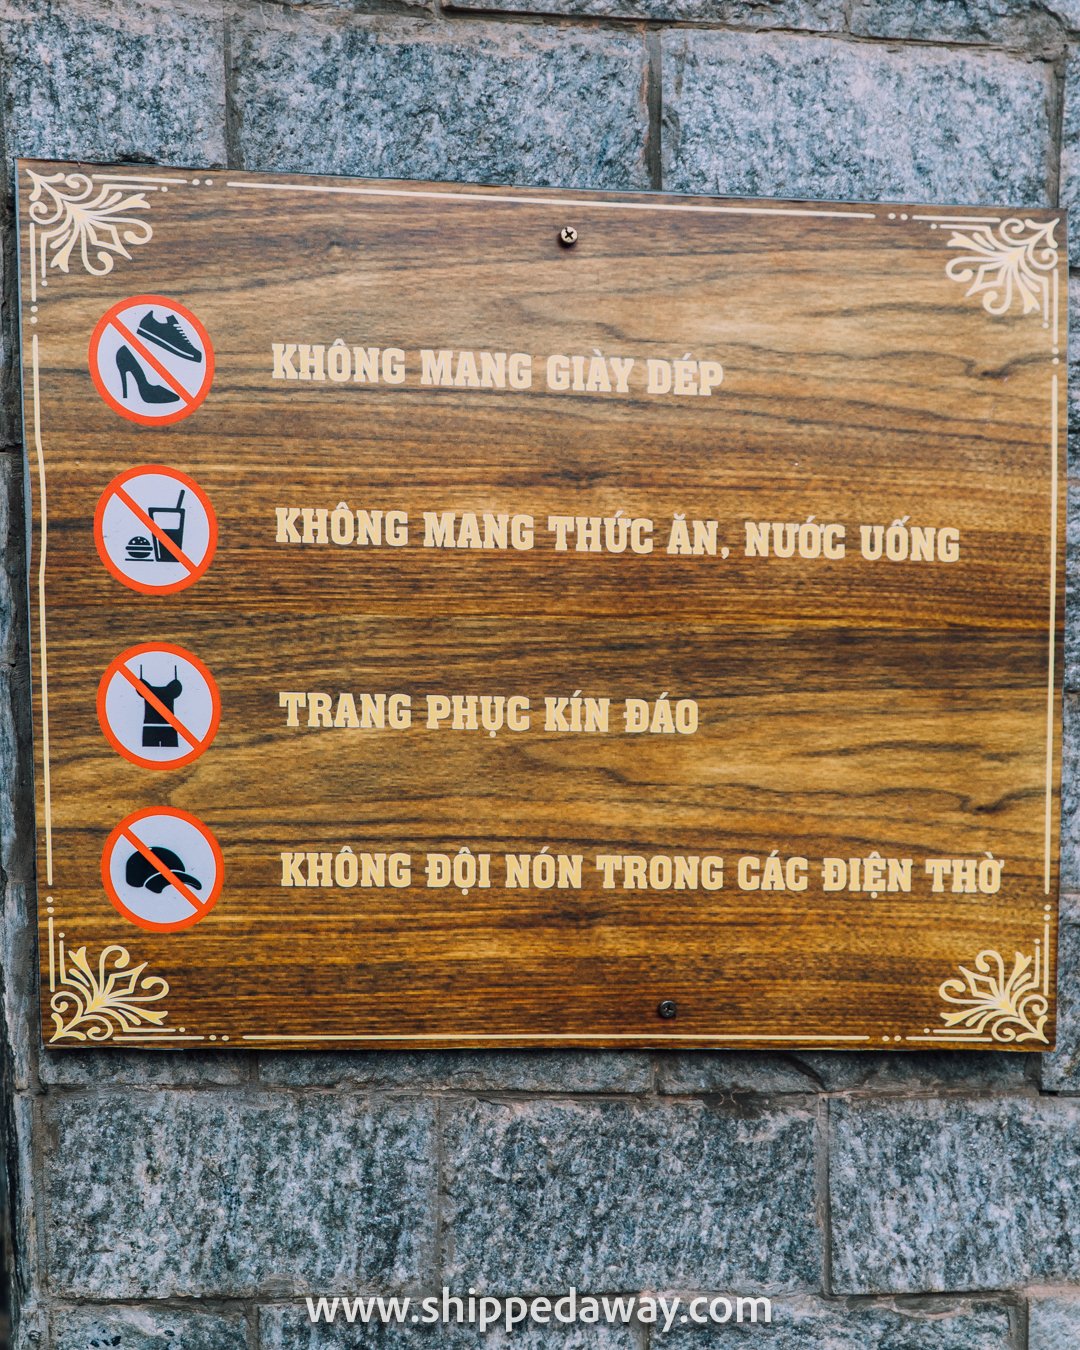 Rules for visiting Buu Long Pagoda in Ho Chi Minh City